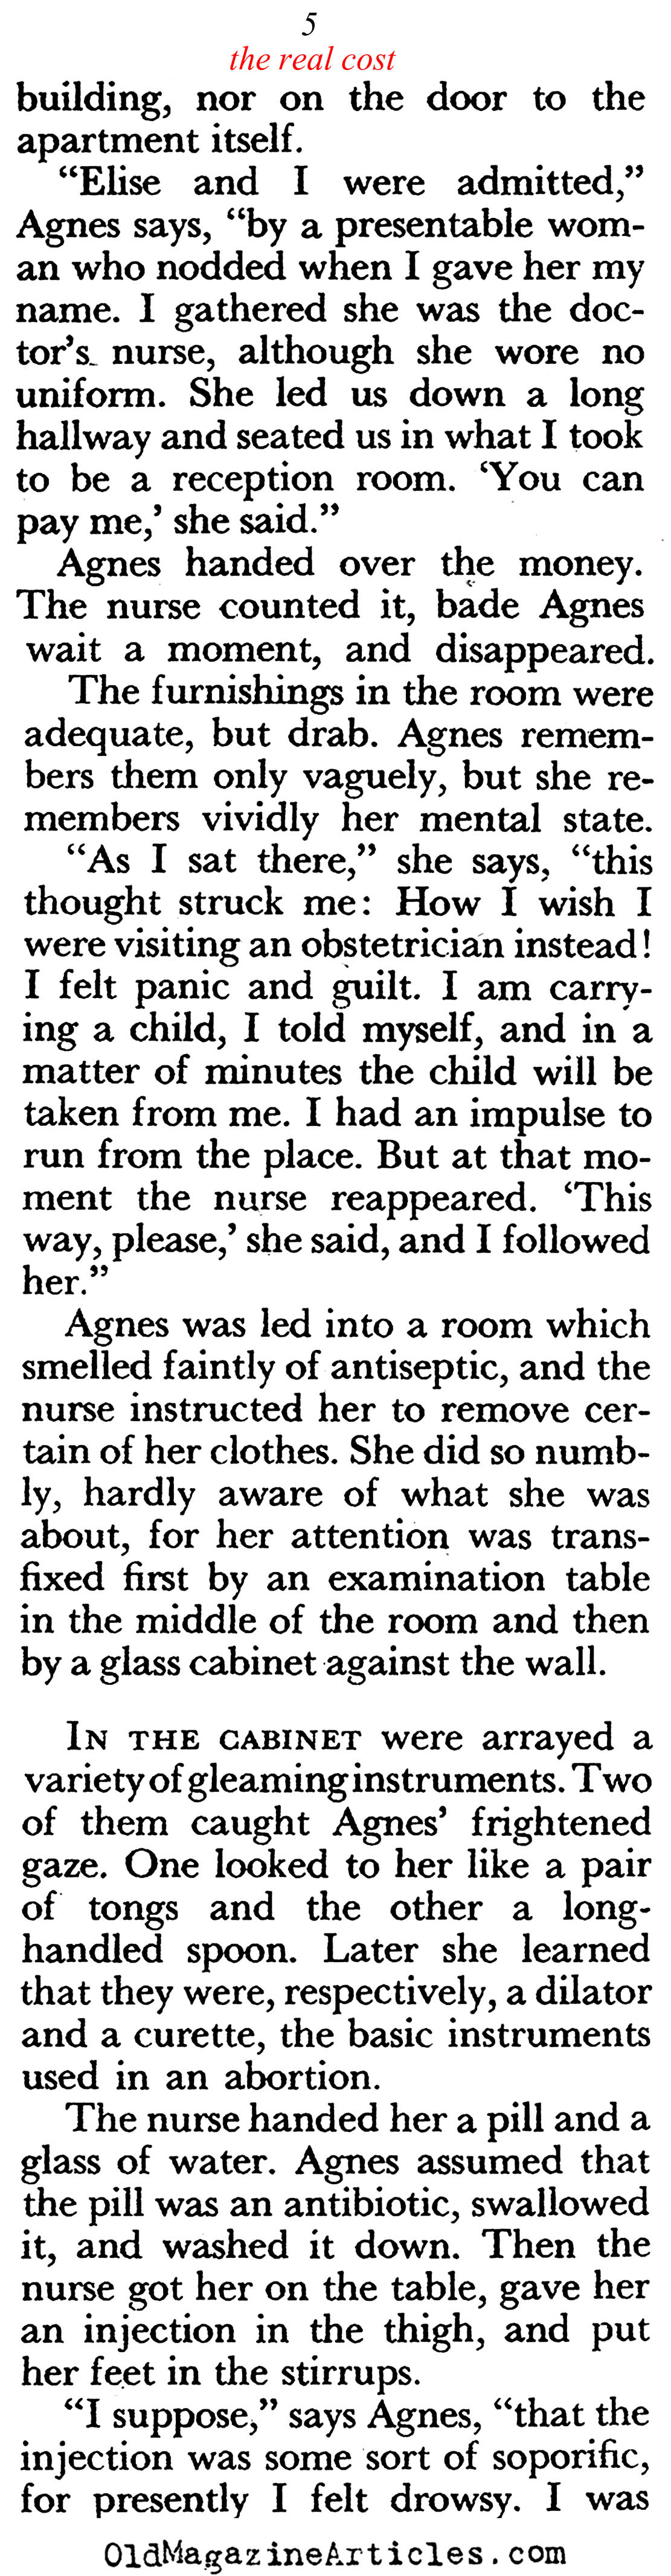 Deepest Regrets (Pageant Magazine, 1958)